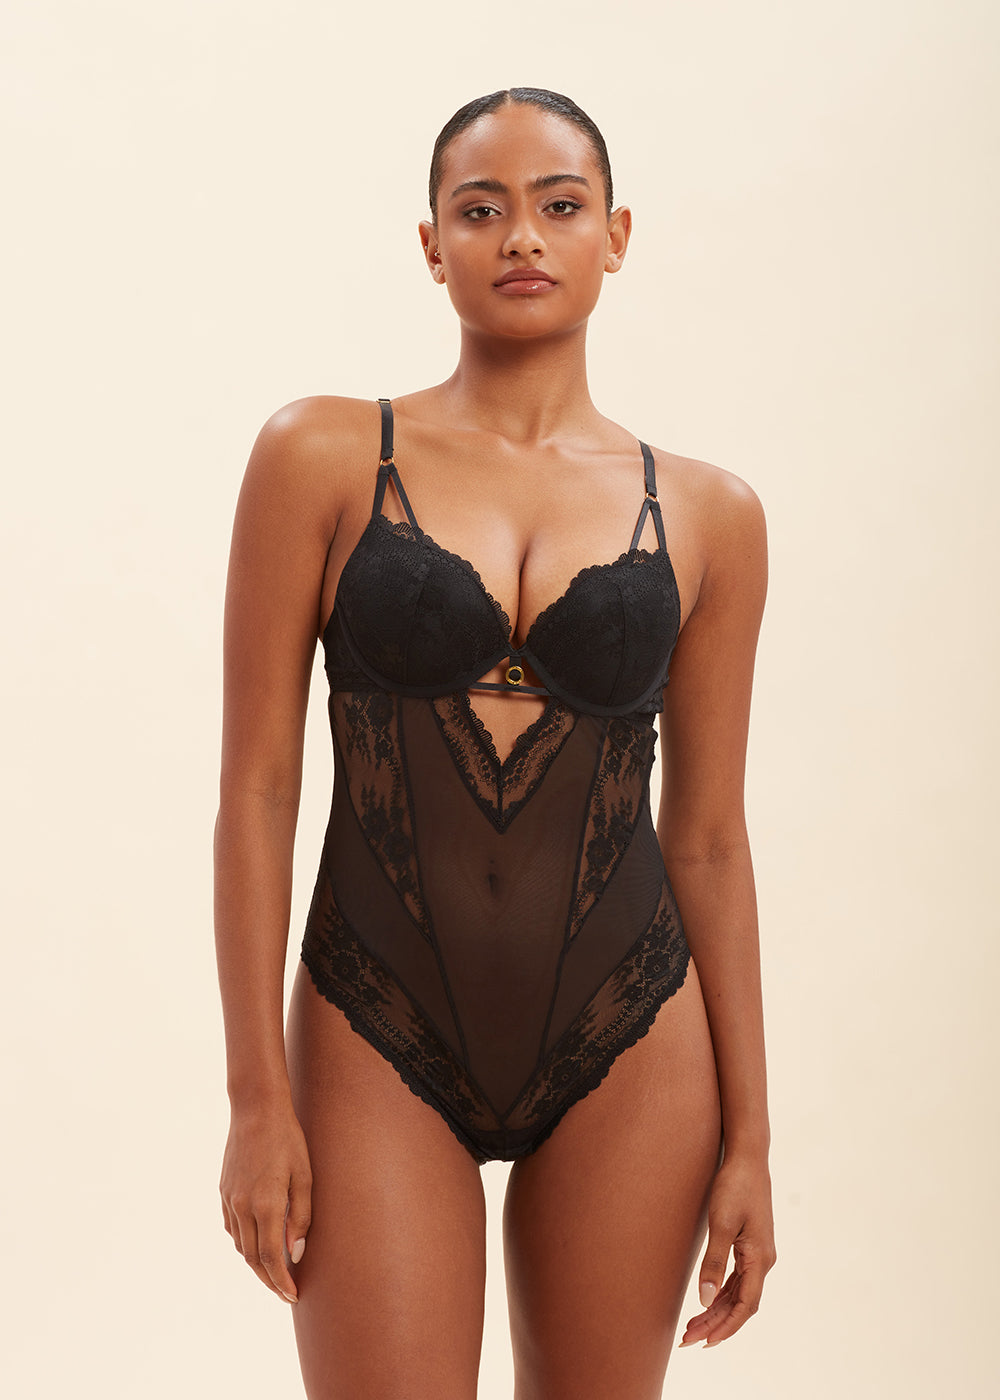 Black Bodysuit with Lace Online Shopping